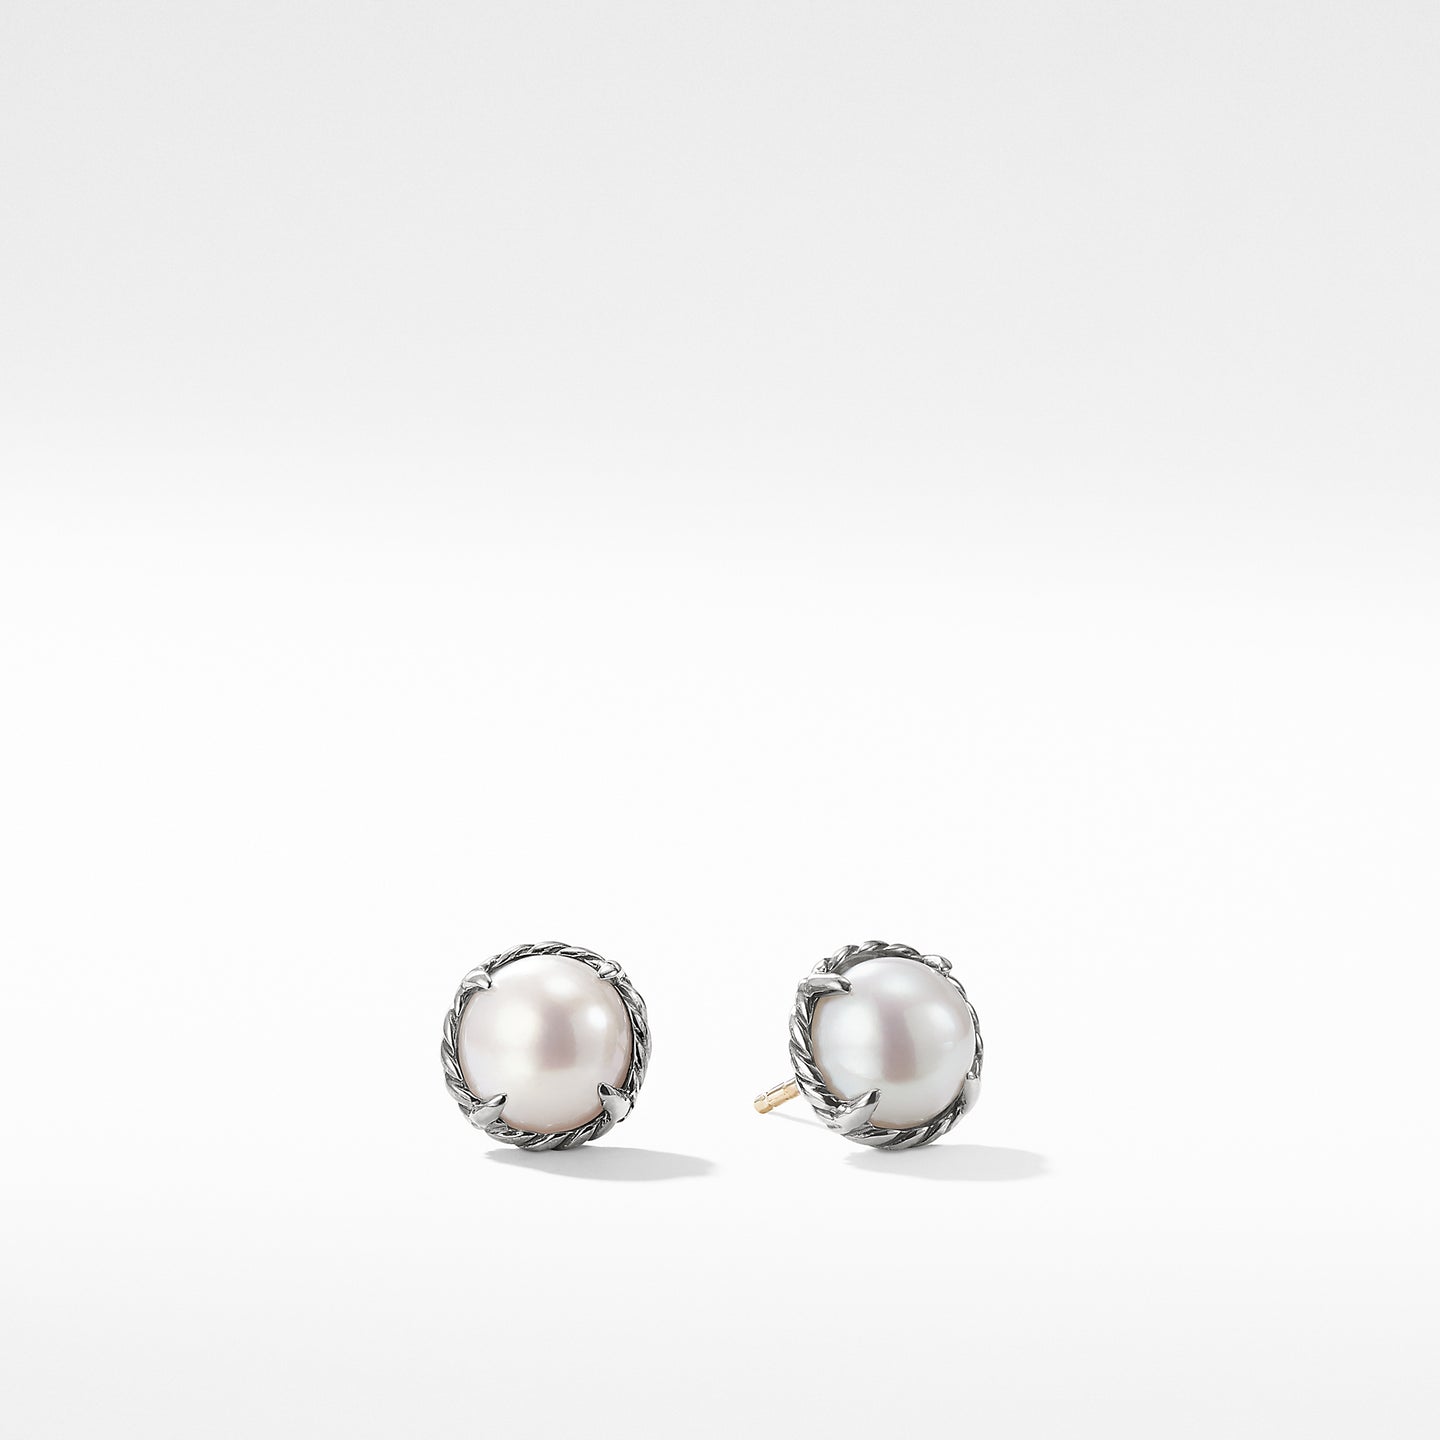 David Yurman The Châtelaine® Collection Earring in Sterling Silver